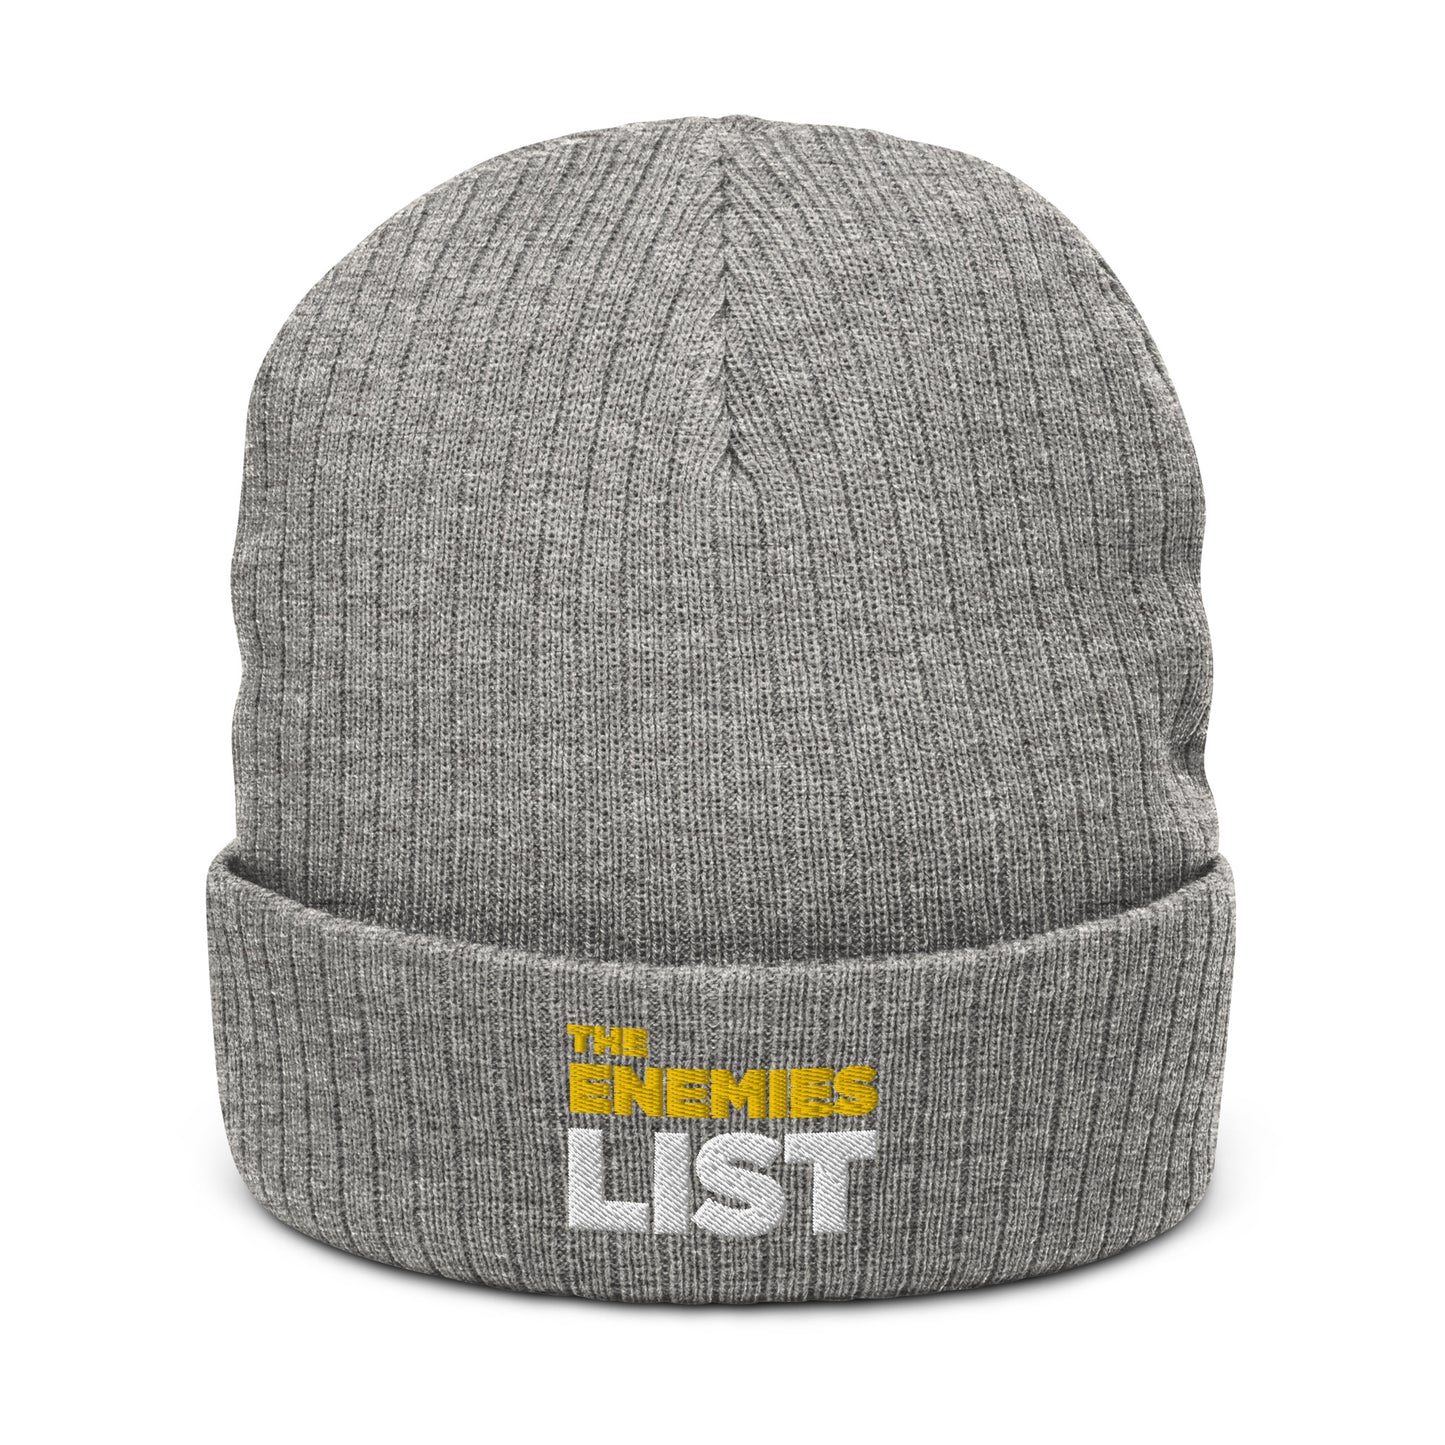 The Enemies List - Ribbed knit beanie